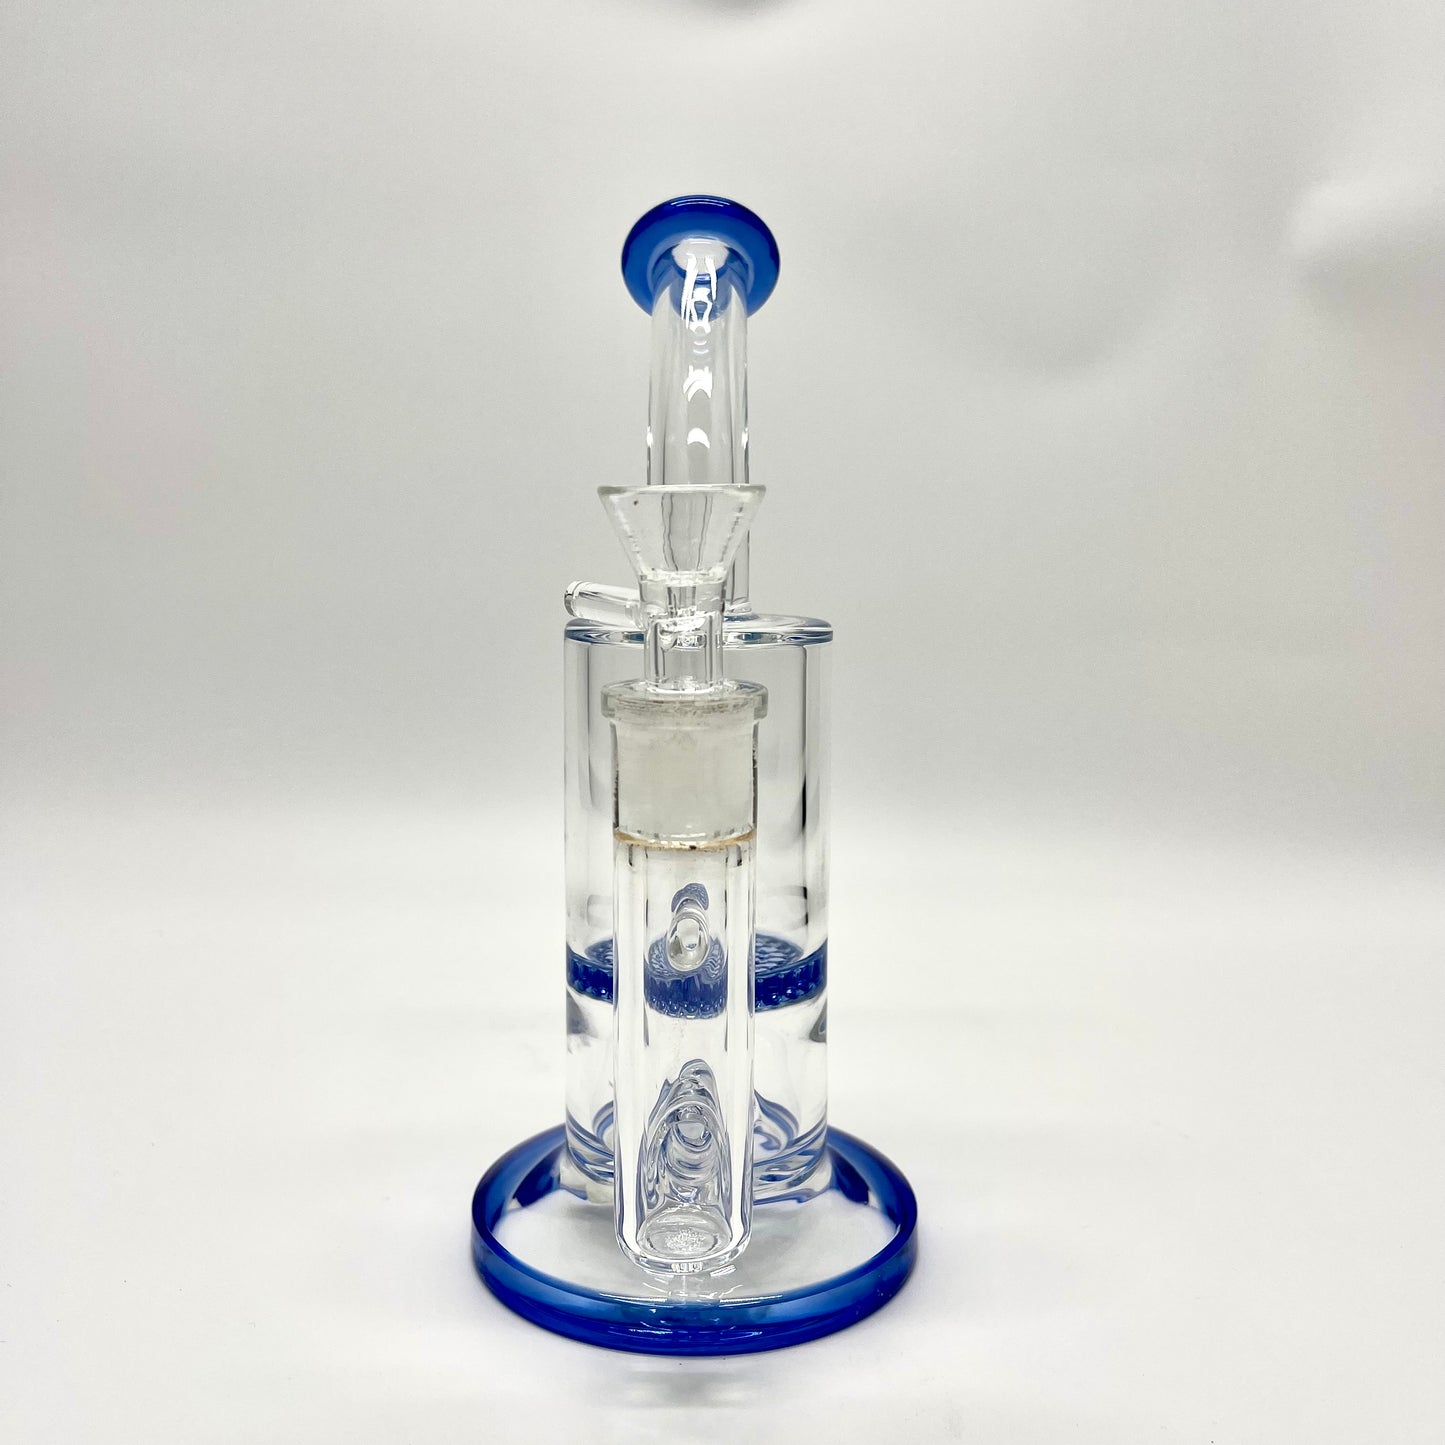 Weedo Medium Glass Bongs (21cm)(Special Edition Only 1 In Stock)